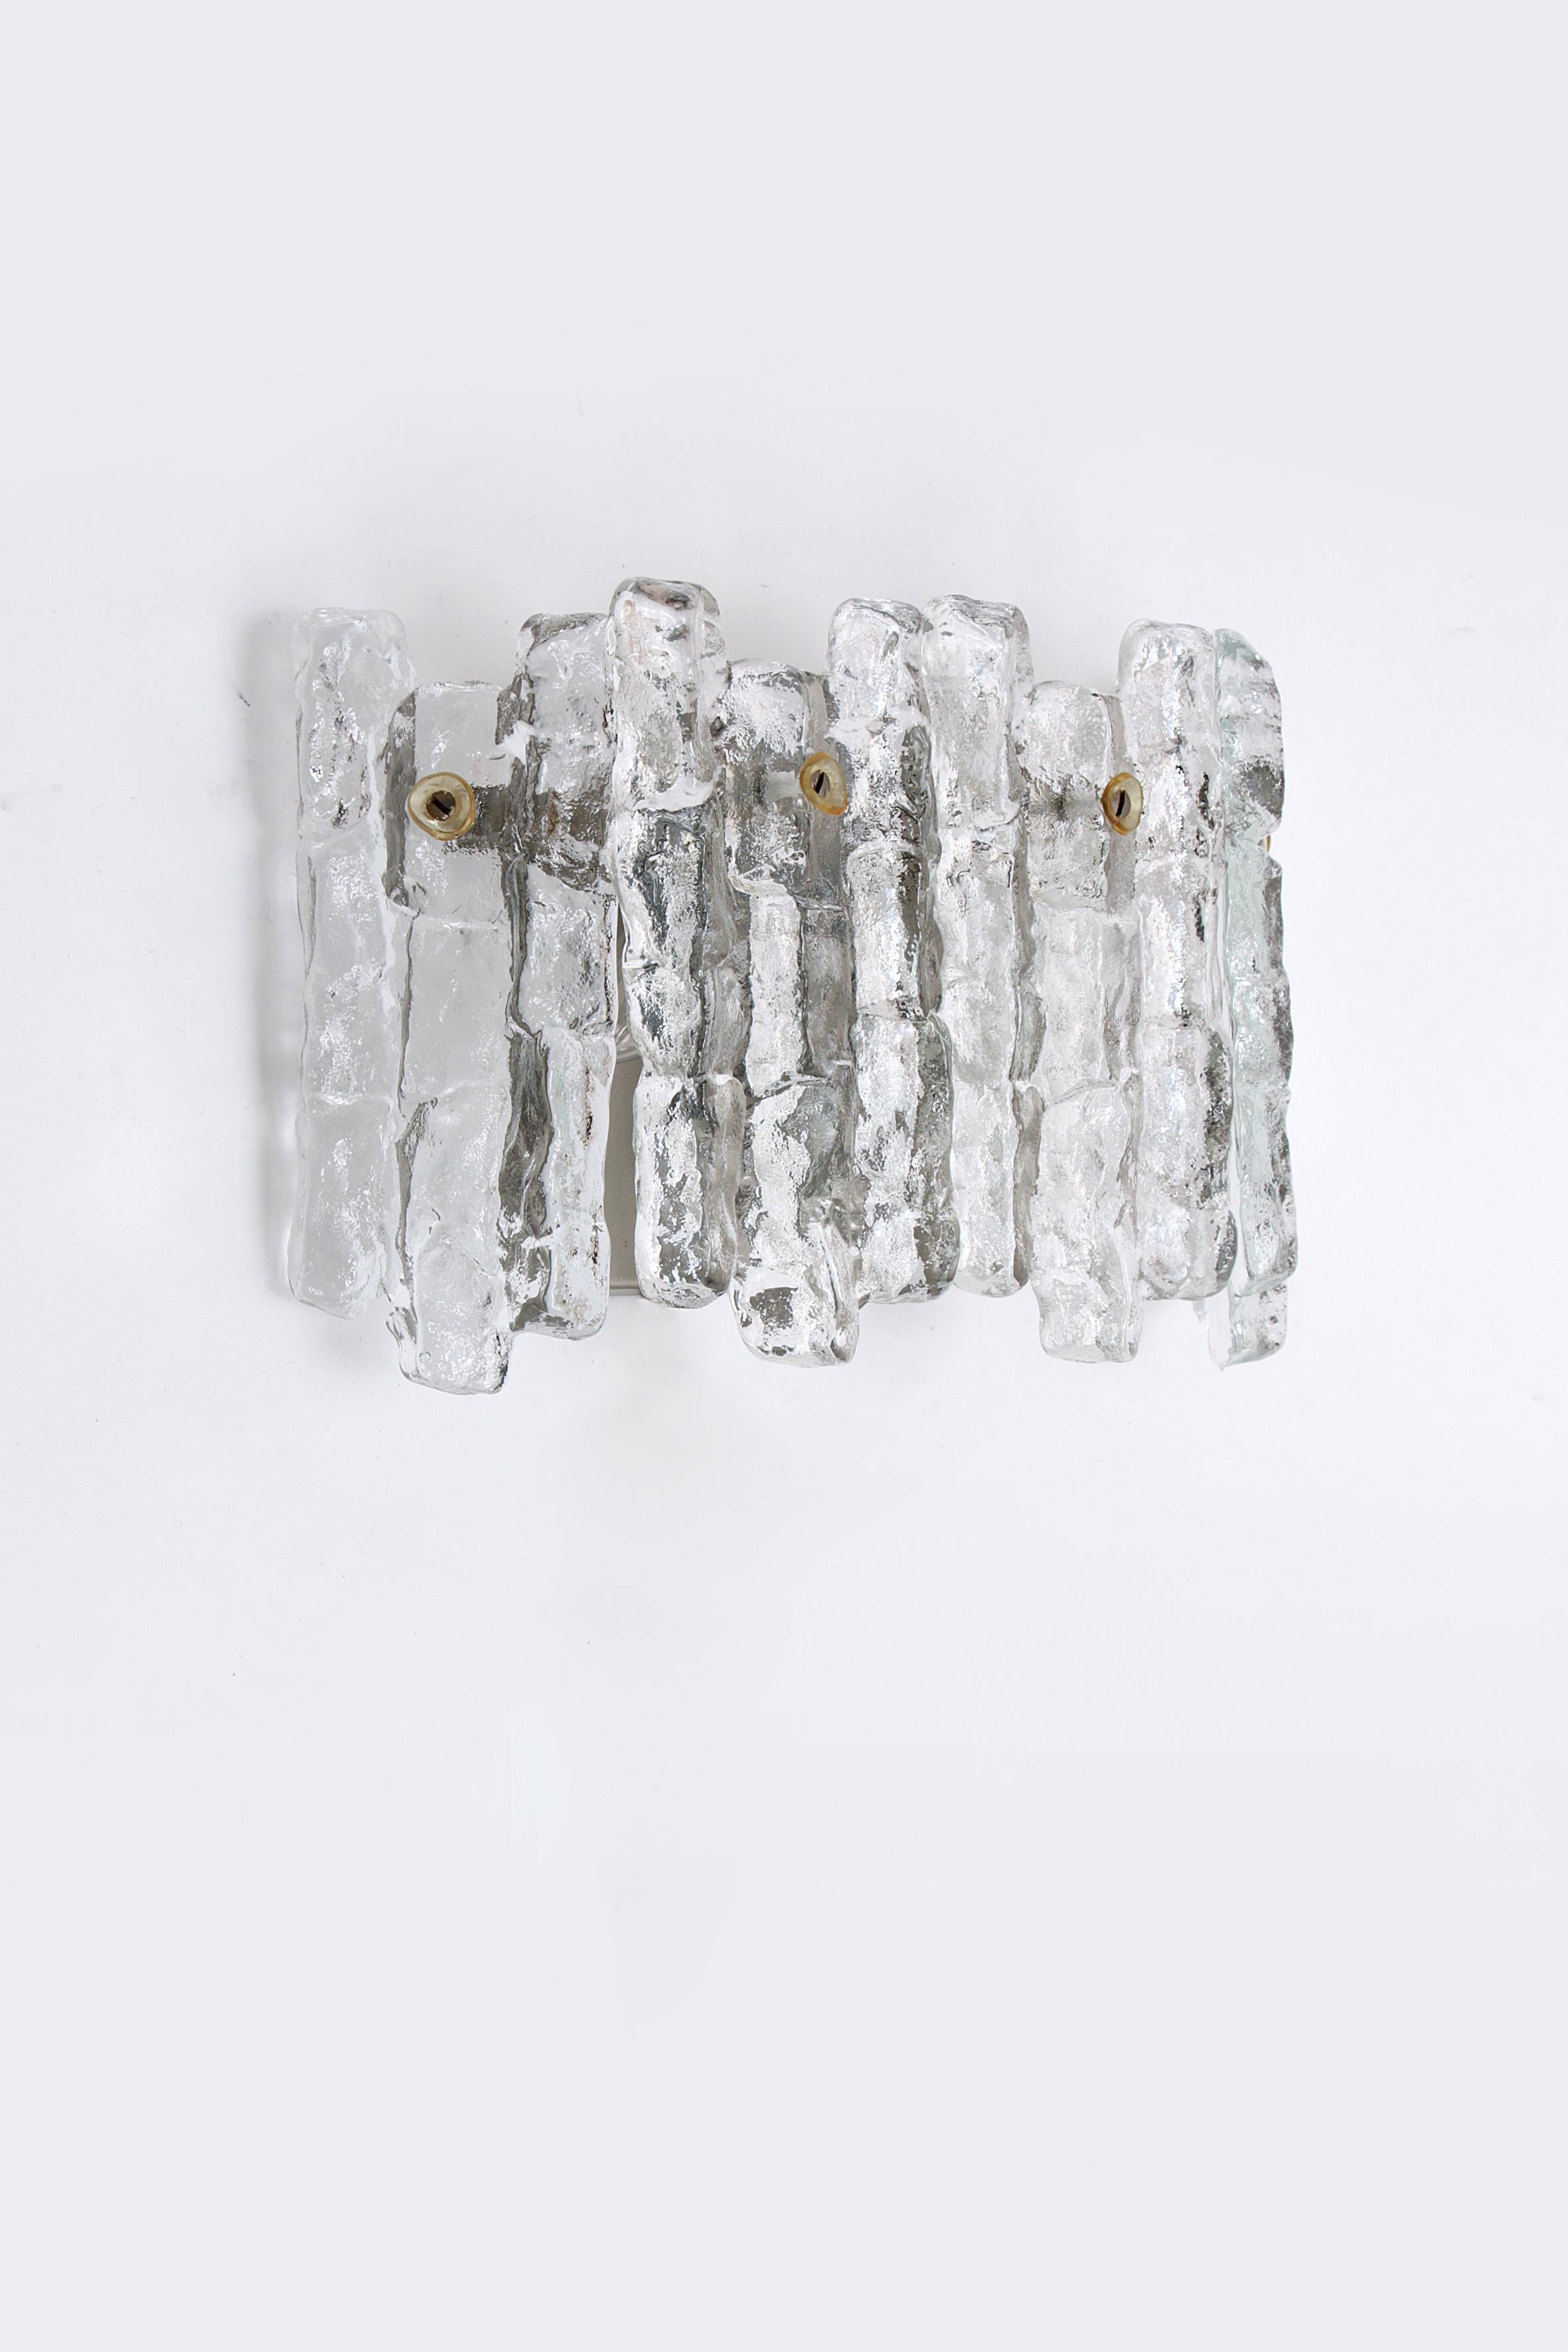 Vintage Design Crystal ice glass wall lamp design by J. T. Kalmar Austria 1960


Beautiful and elegant modern metal wall lamp or sconce, manufactured by J.T. Kalmar Austria in the 1960s. 

Beautiful design, executed to a very high standard. Four